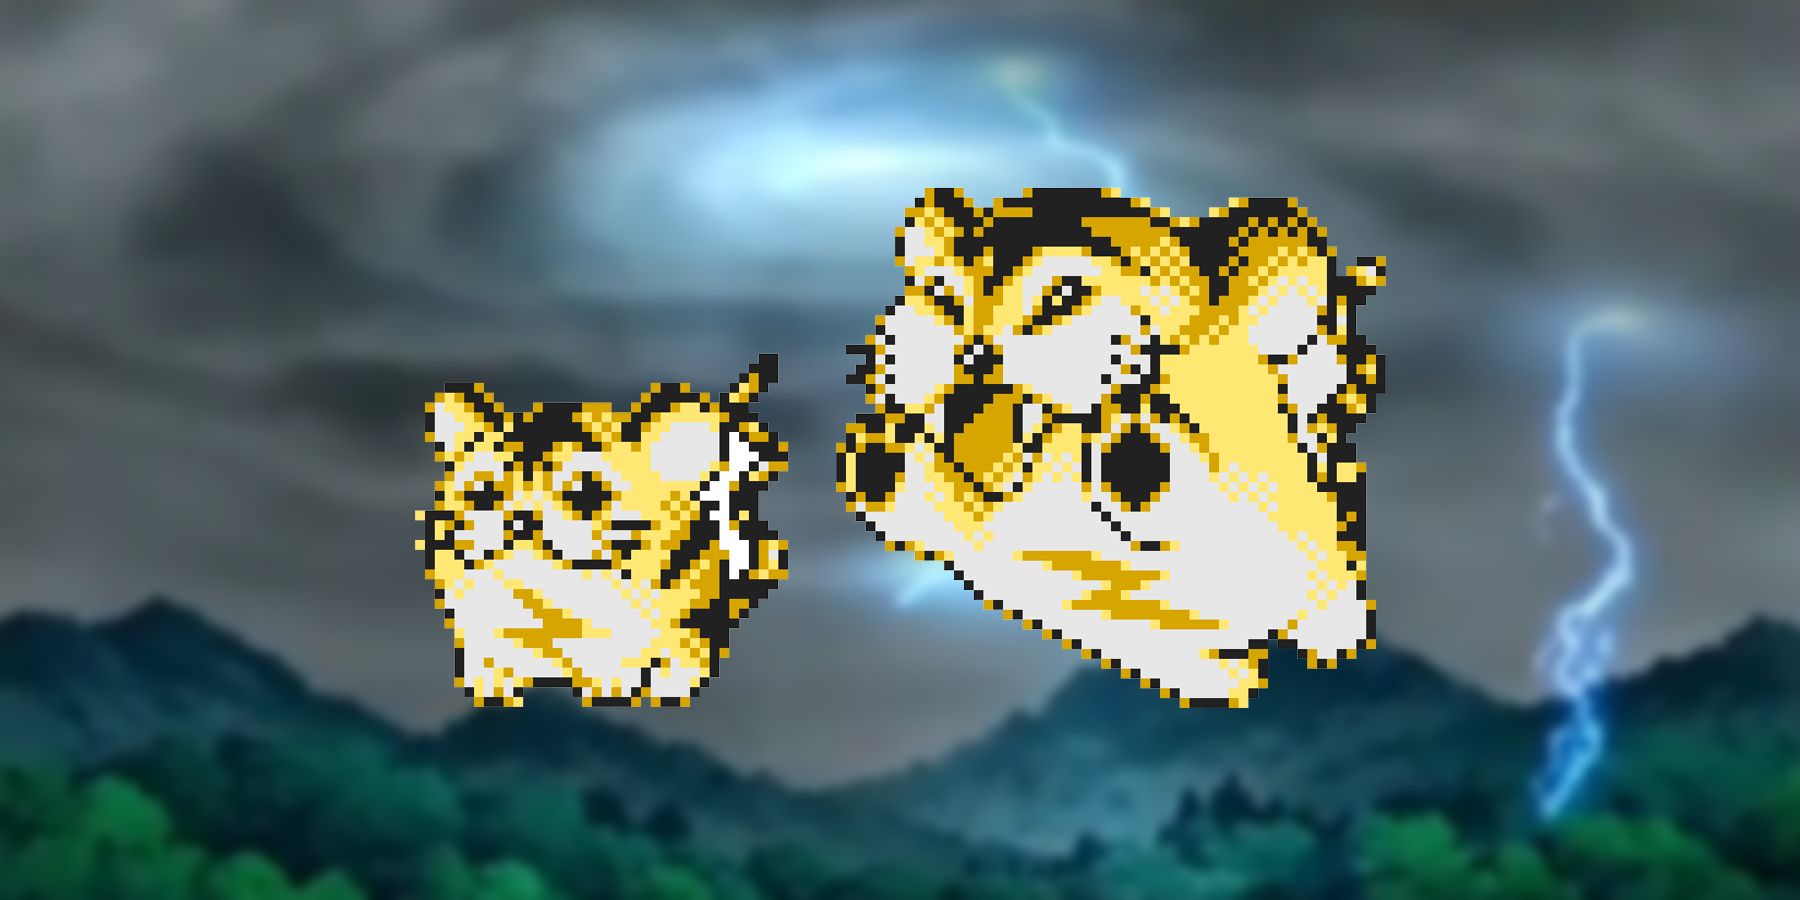 The beta designs for Kotora and Raitore scrapped from Pokemon Red and Blue as well as Gold and Silver